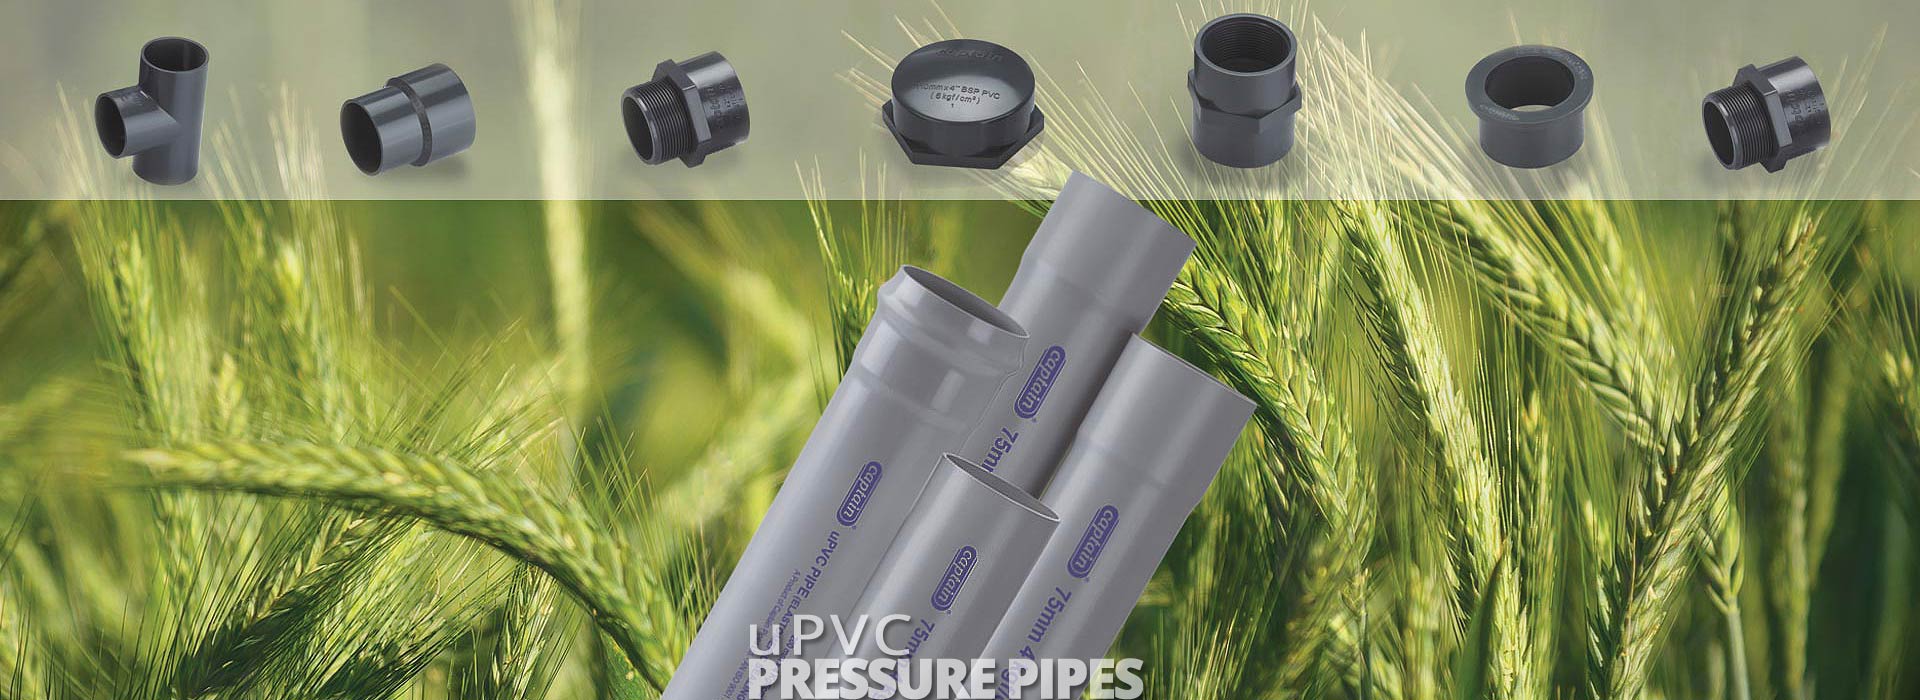 uPVC Pressure Pipes from Captain Pipes Ltd.